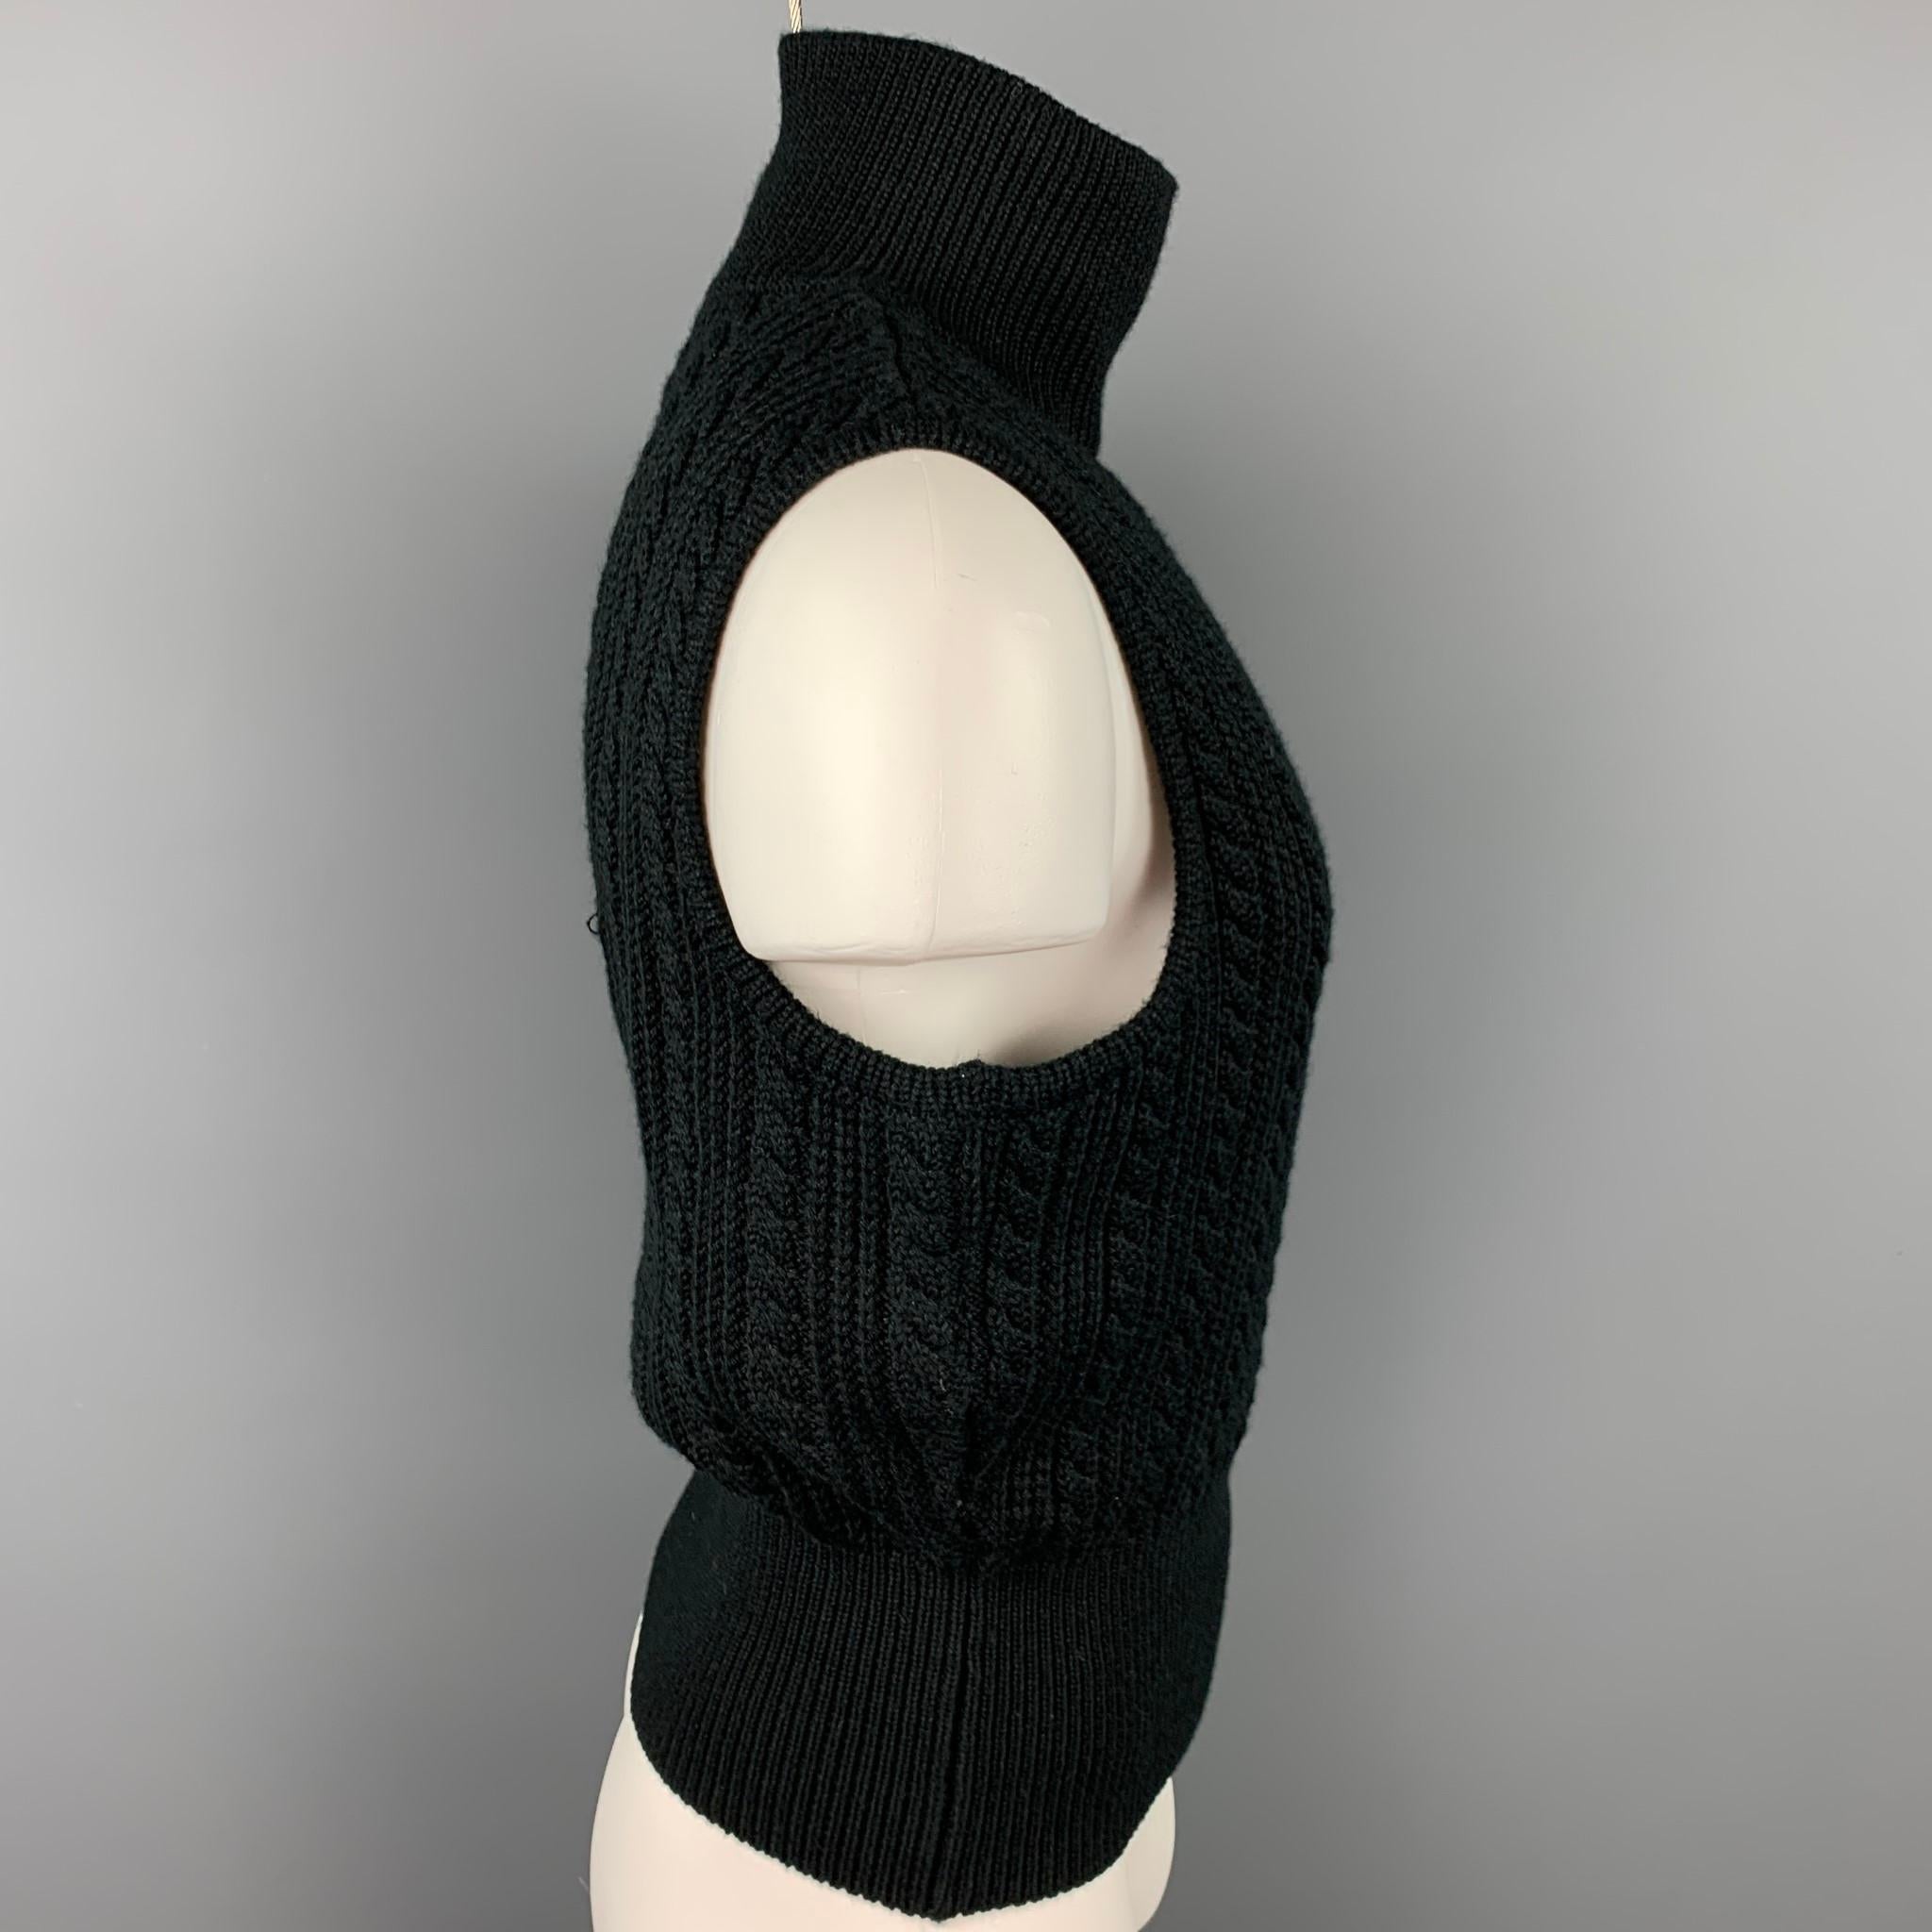 Vintage JUNIOR GAULTIER vest comes in a black knitted wool / acrylic featuring a turtle-neck.

Very Good Pre-Owned Condition.
Marked: 50

Measurements:

Shoulder: 16.5 in.
Chest: 42 in.
Length: 22.5 in. 